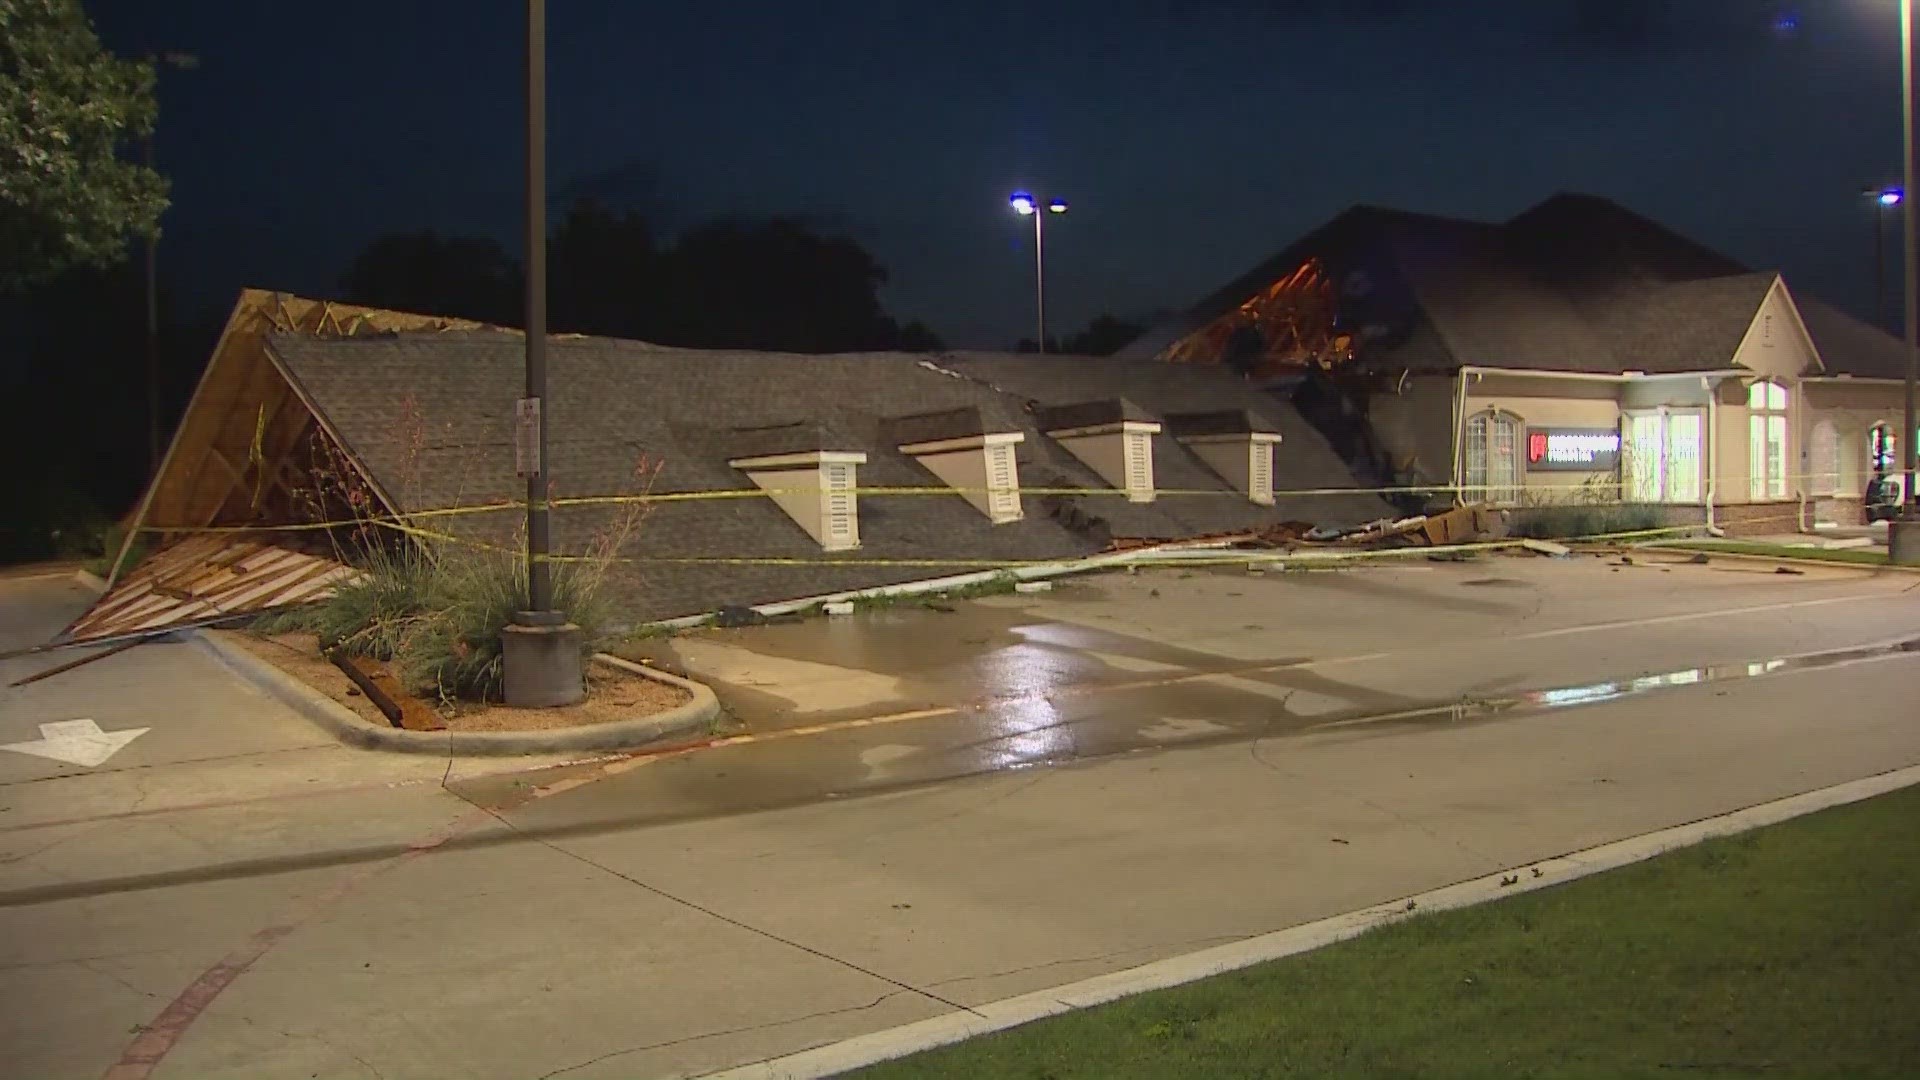 The Collin County Sheriff's Office told WFAA there were no injuries reported in the roof collapse.